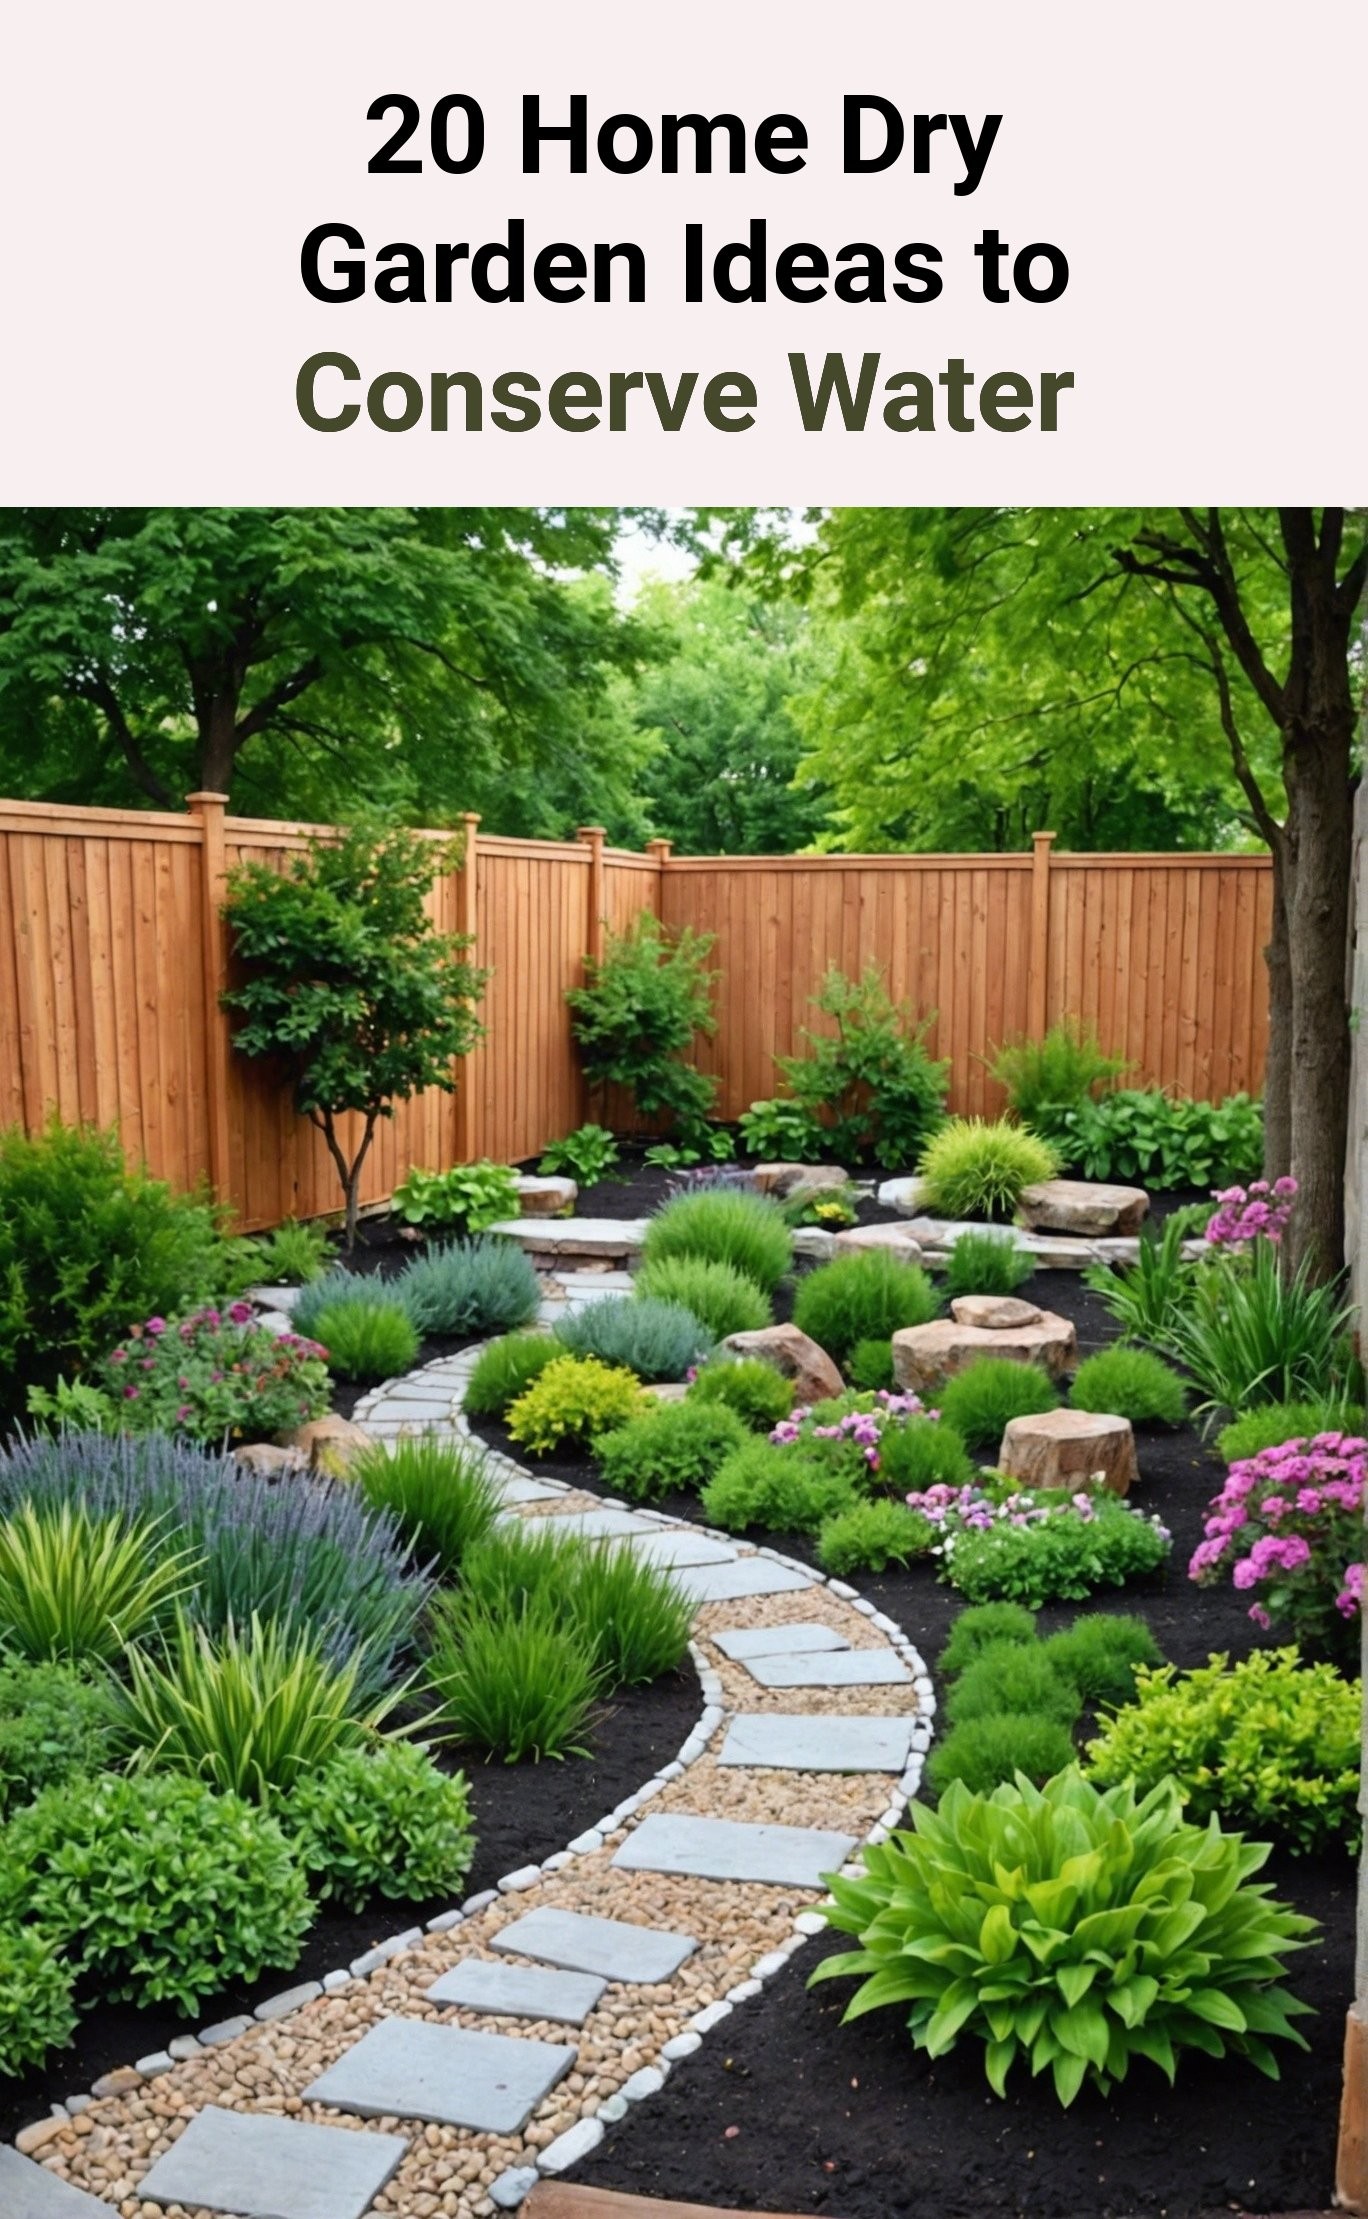 20 Home Dry Garden Ideas to Conserve Water